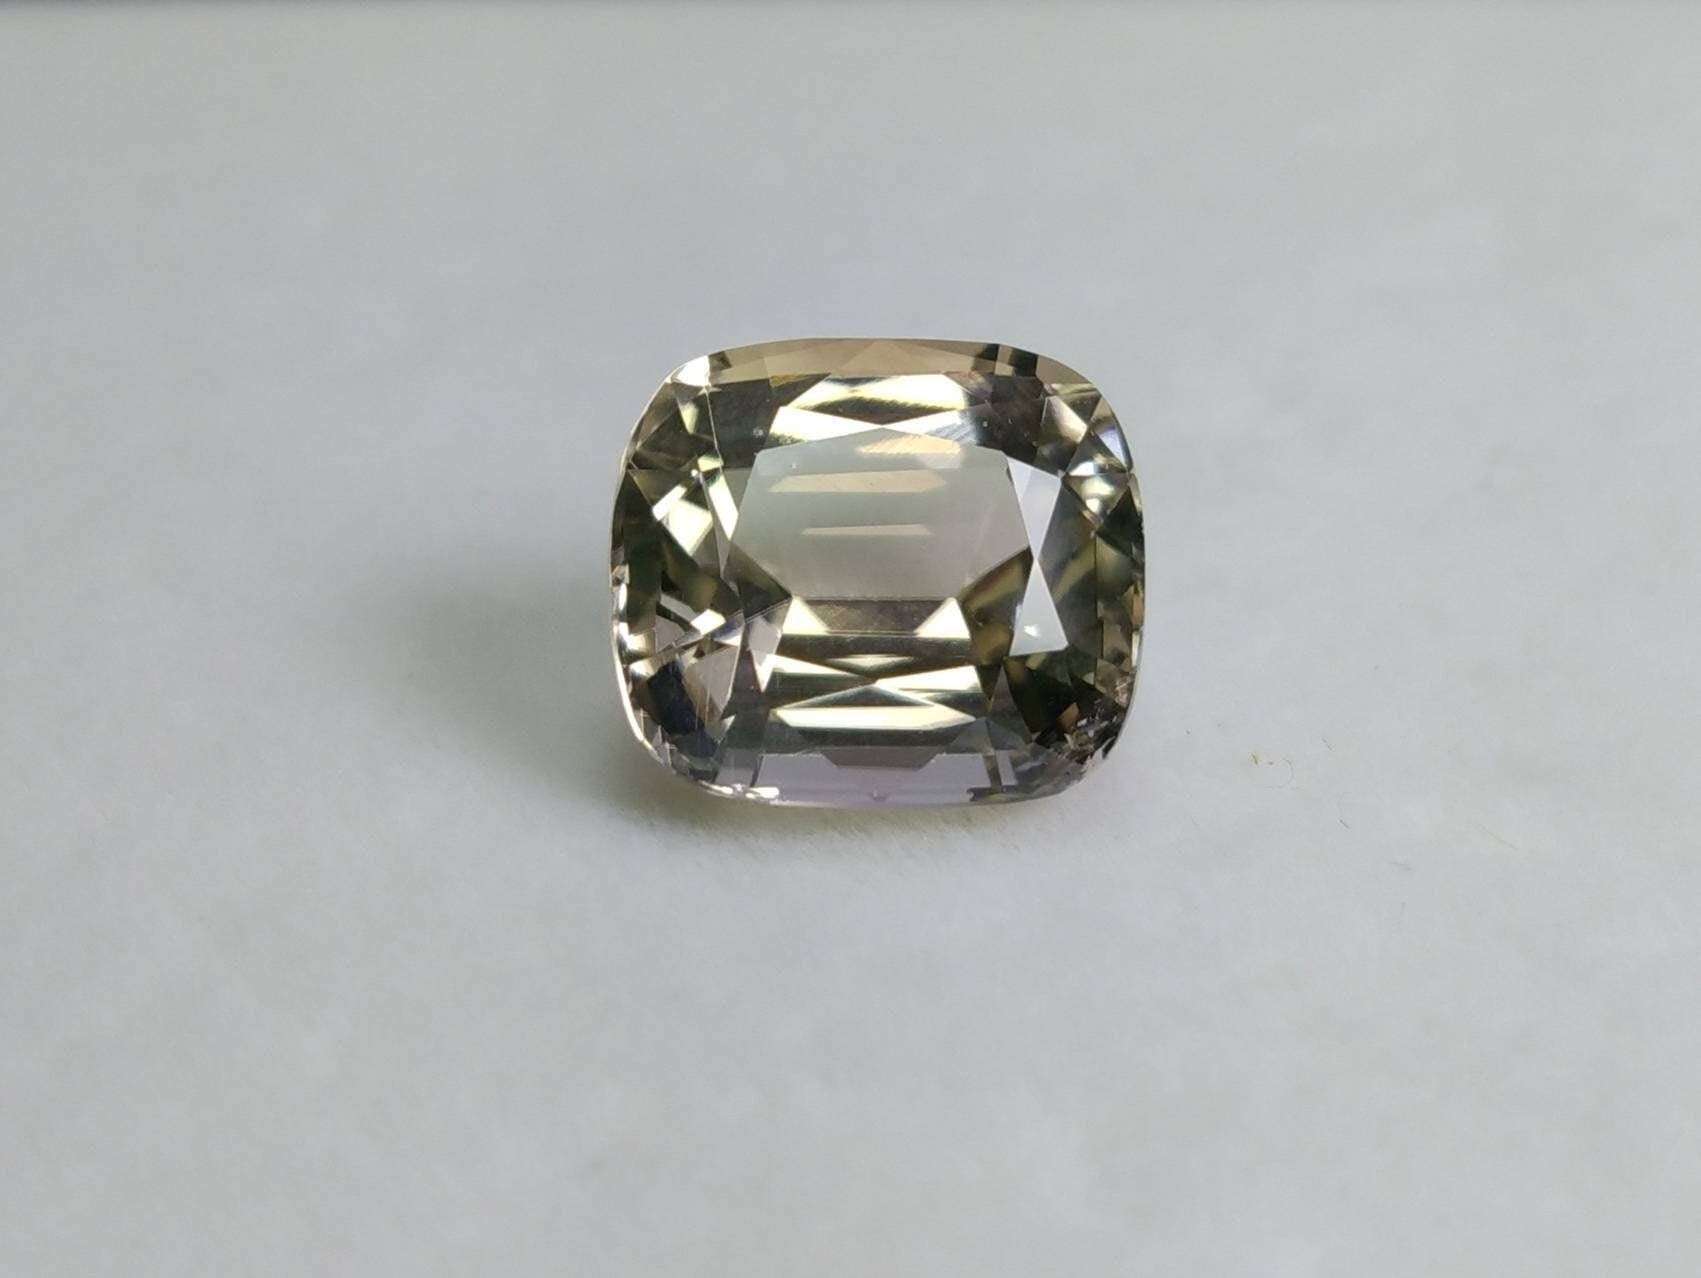 ARSAA GEMS AND MINERALSNatural top quality beautiful 7 carats eye clean clarity faceted antique cushion shape yellow Tourmaline gem - Premium  from ARSAA GEMS AND MINERALS - Just $200.00! Shop now at ARSAA GEMS AND MINERALS